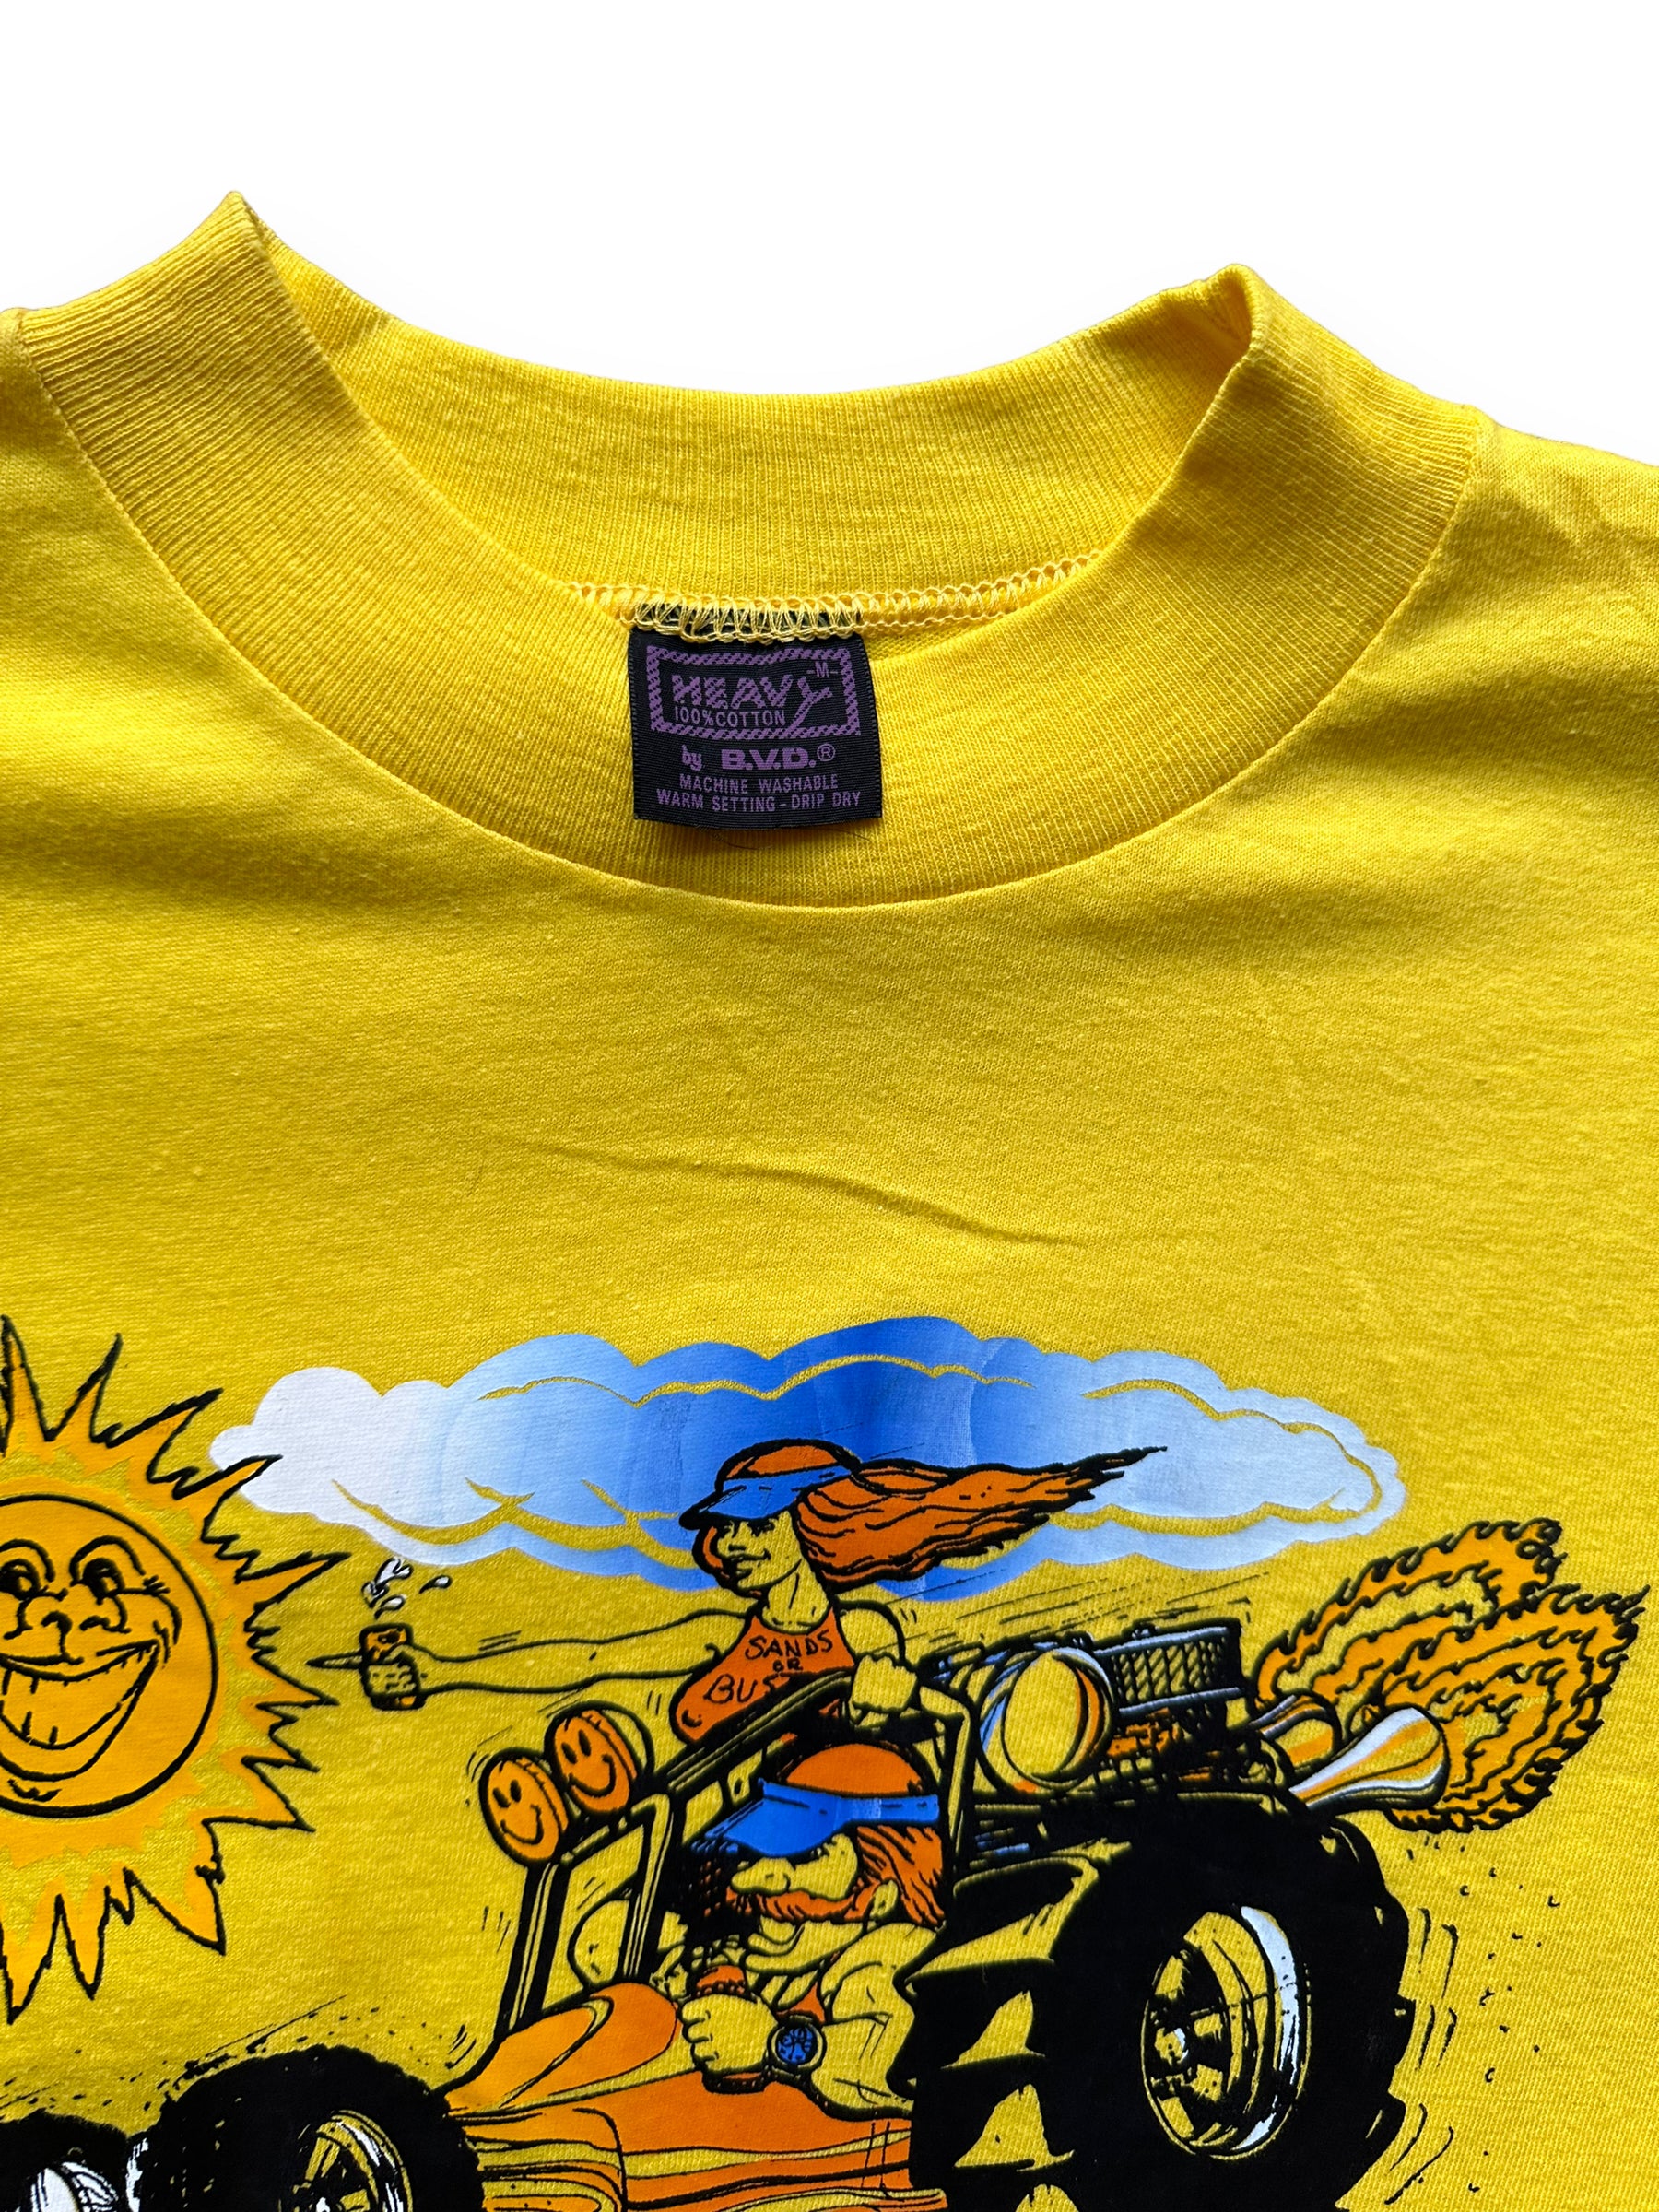 Tag View of Vintage Dune Buggy Graphic Tee SZ L | Vintage Bull Shirt Graphic T-Shirts Seattle | Barn Owl Vintage Tees Seattle